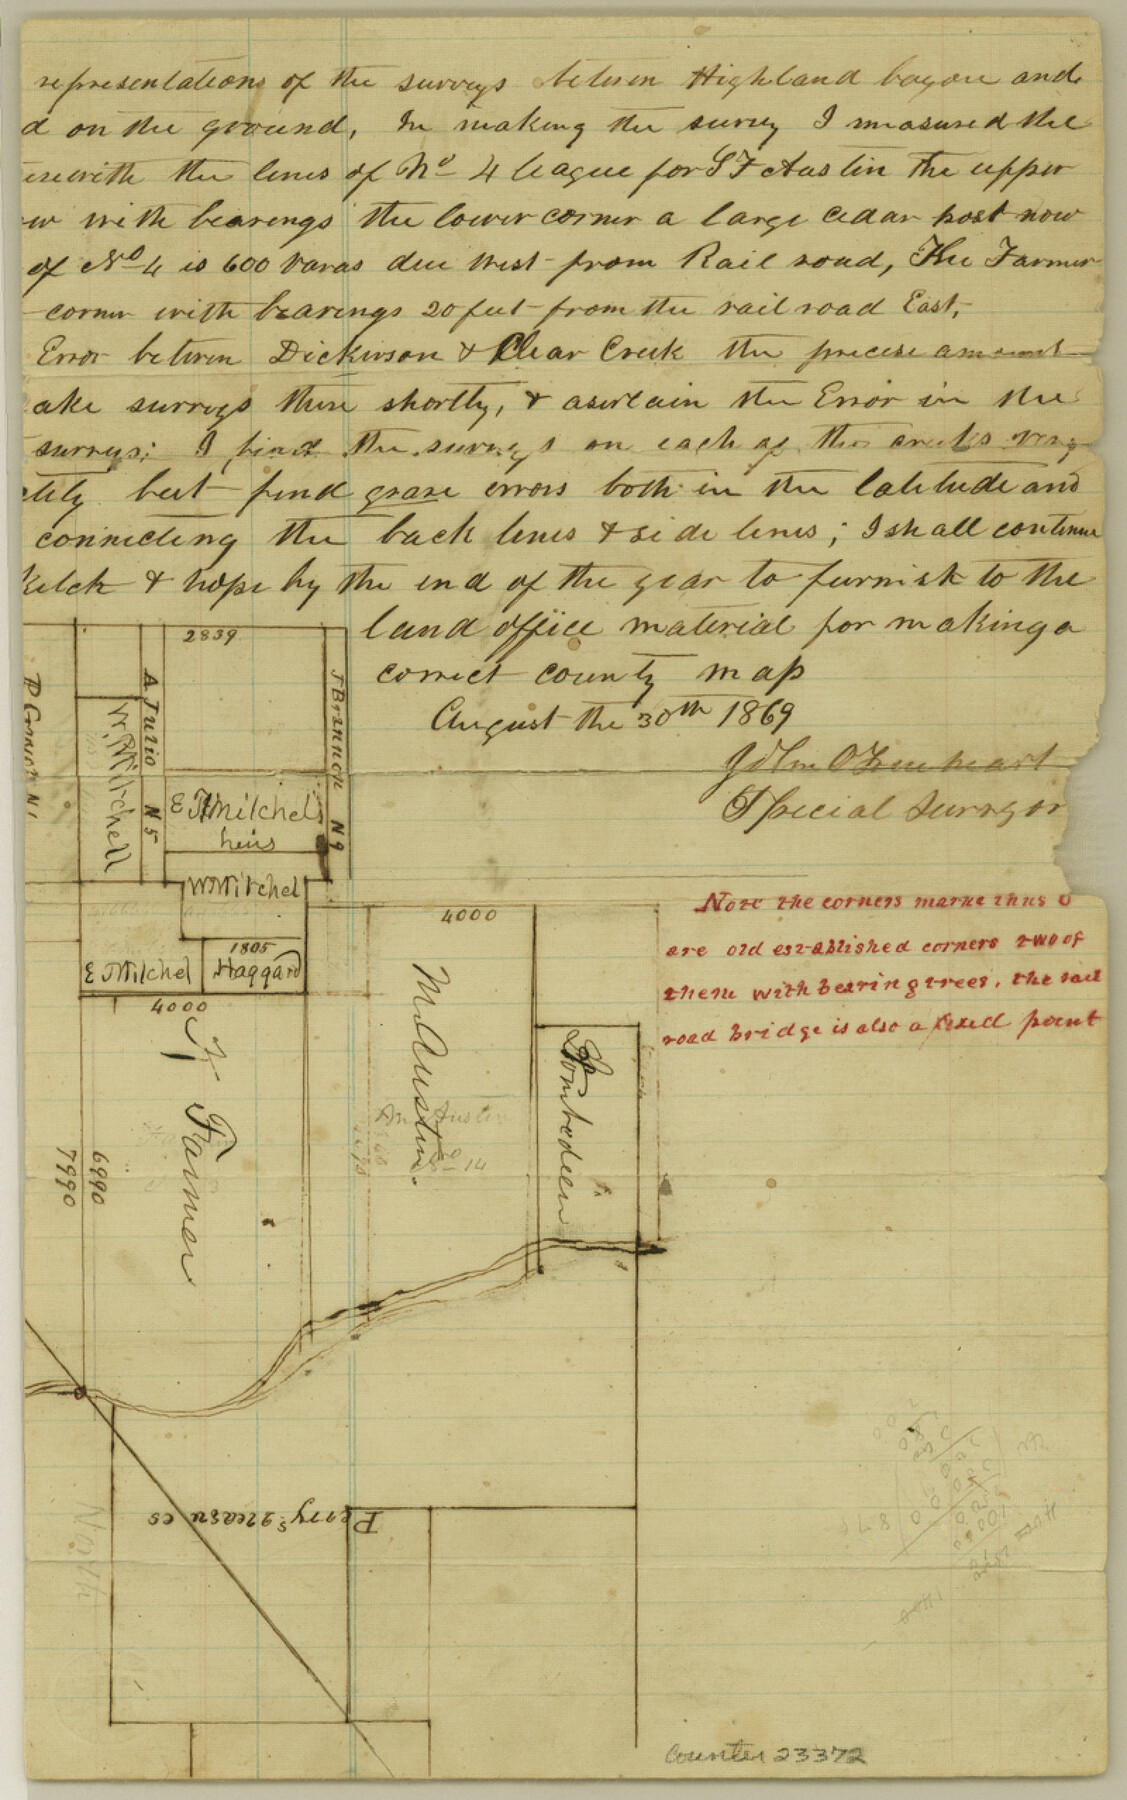 23372, Galveston County Sketch File 10, General Map Collection